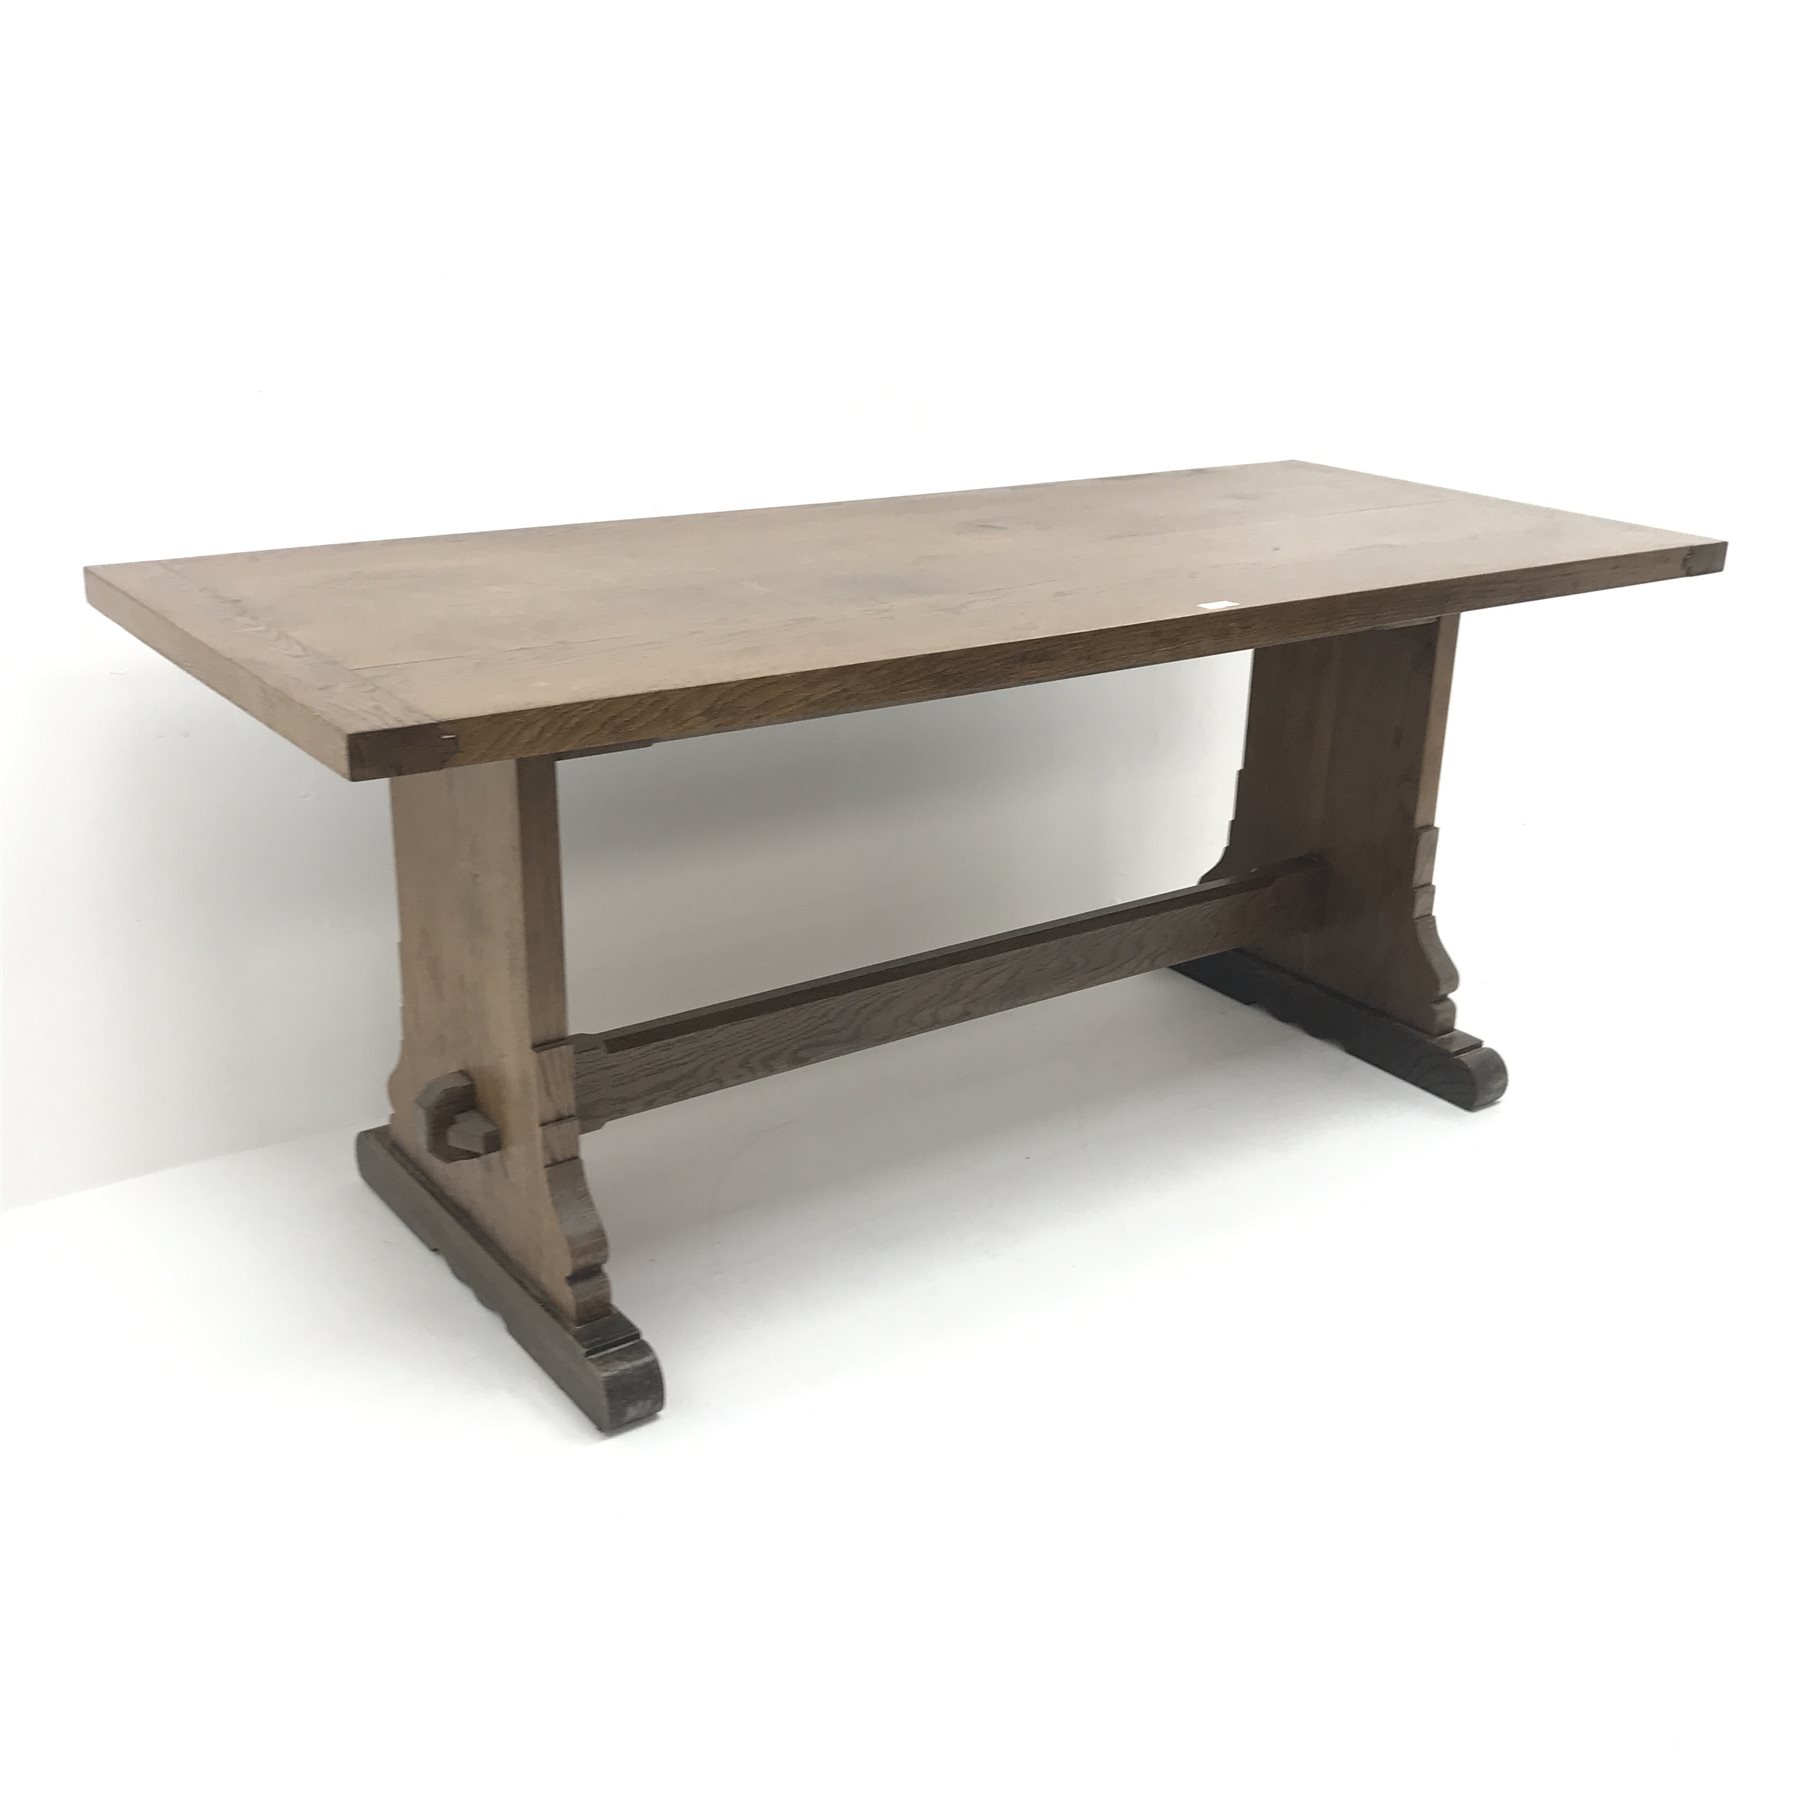 20th century oak refectory table, shaped solid end supports joined by single undertier, sledge feet, - Image 2 of 8